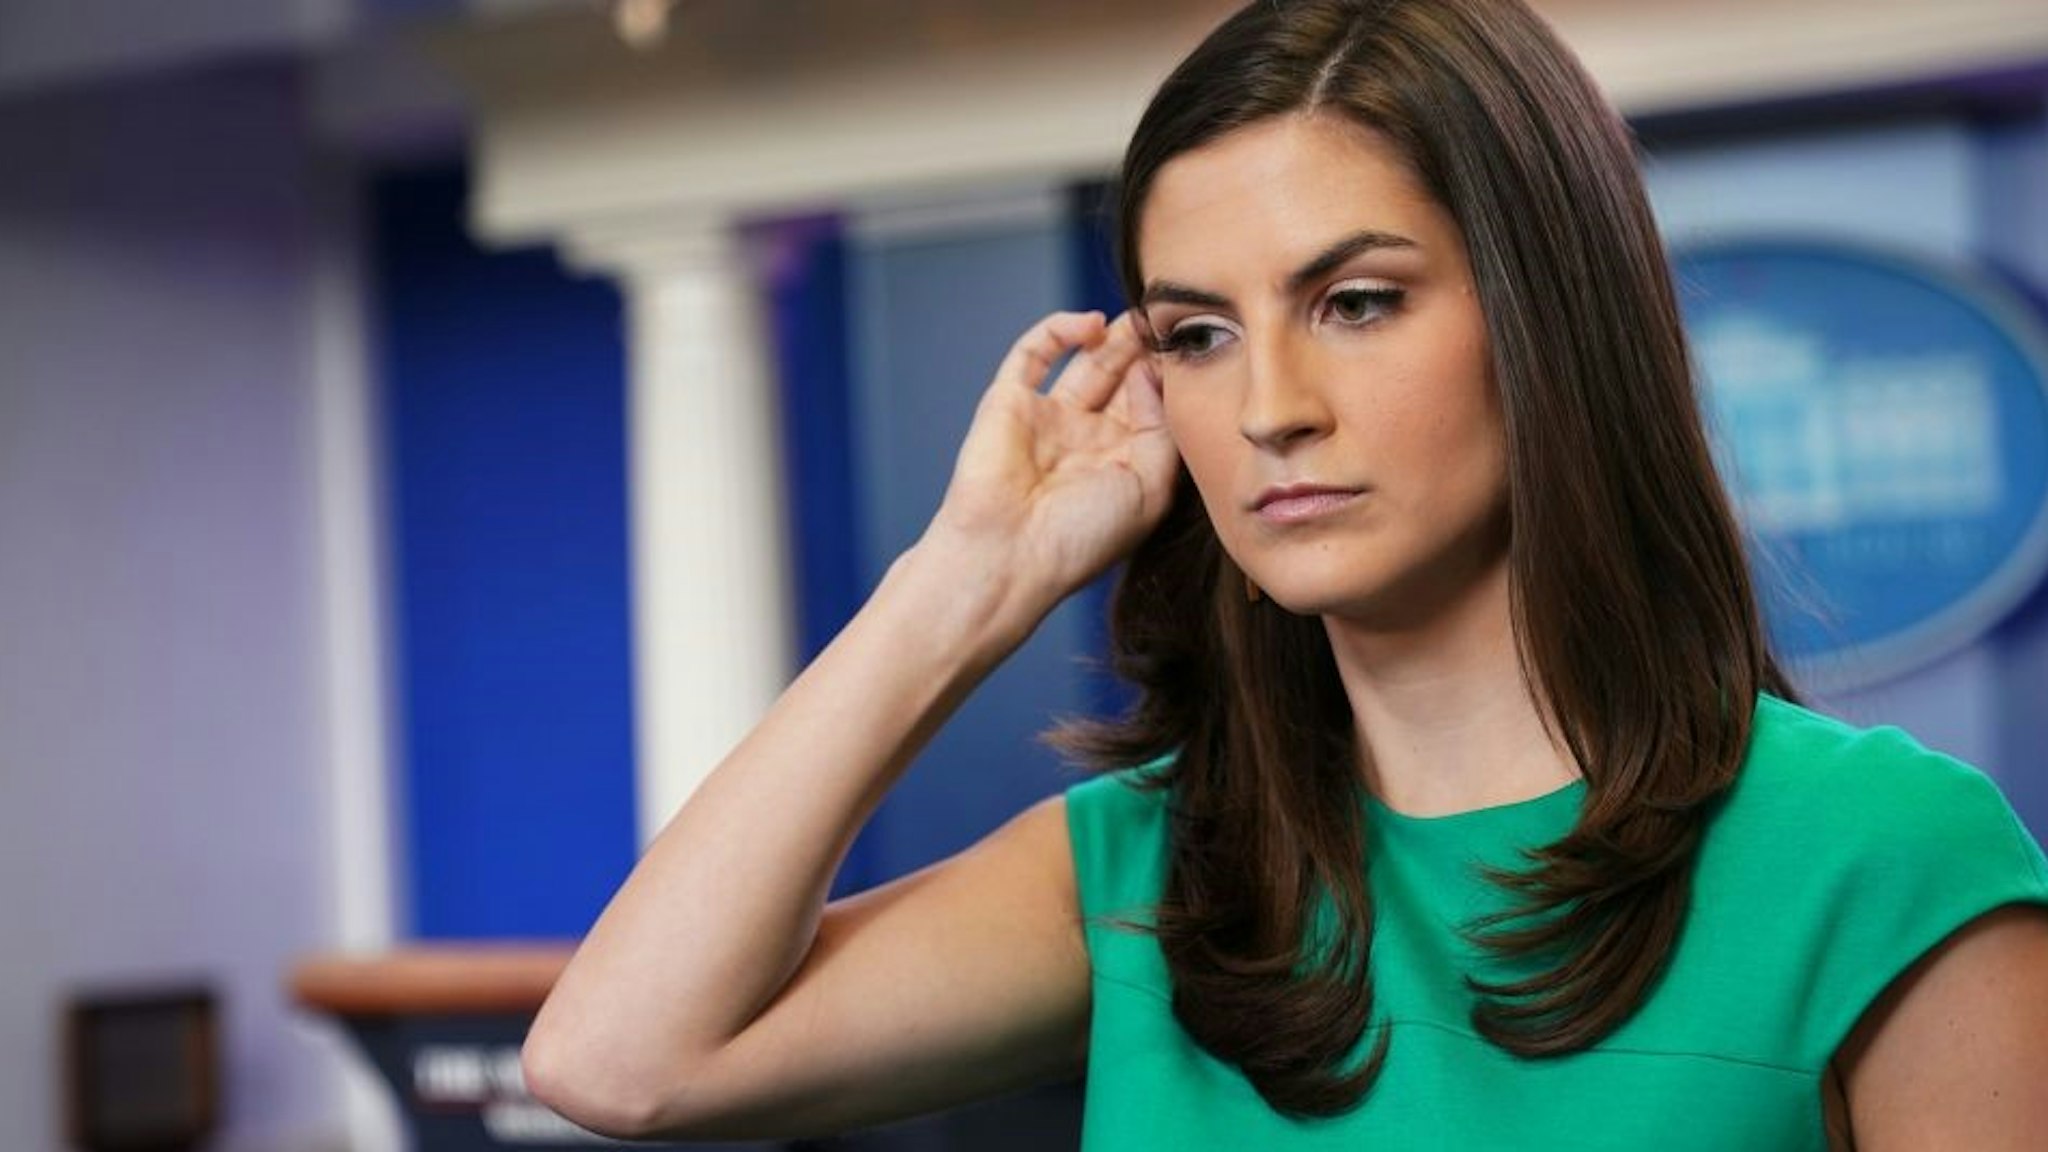 CNN White House correspondent Kaitlan Collins is seen in the Brady Briefing Room of the White House before the start of the daily briefing on August 15, 2018 in Washington, DC. (Photo by MANDEL NGAN / AFP) (Photo credit should read